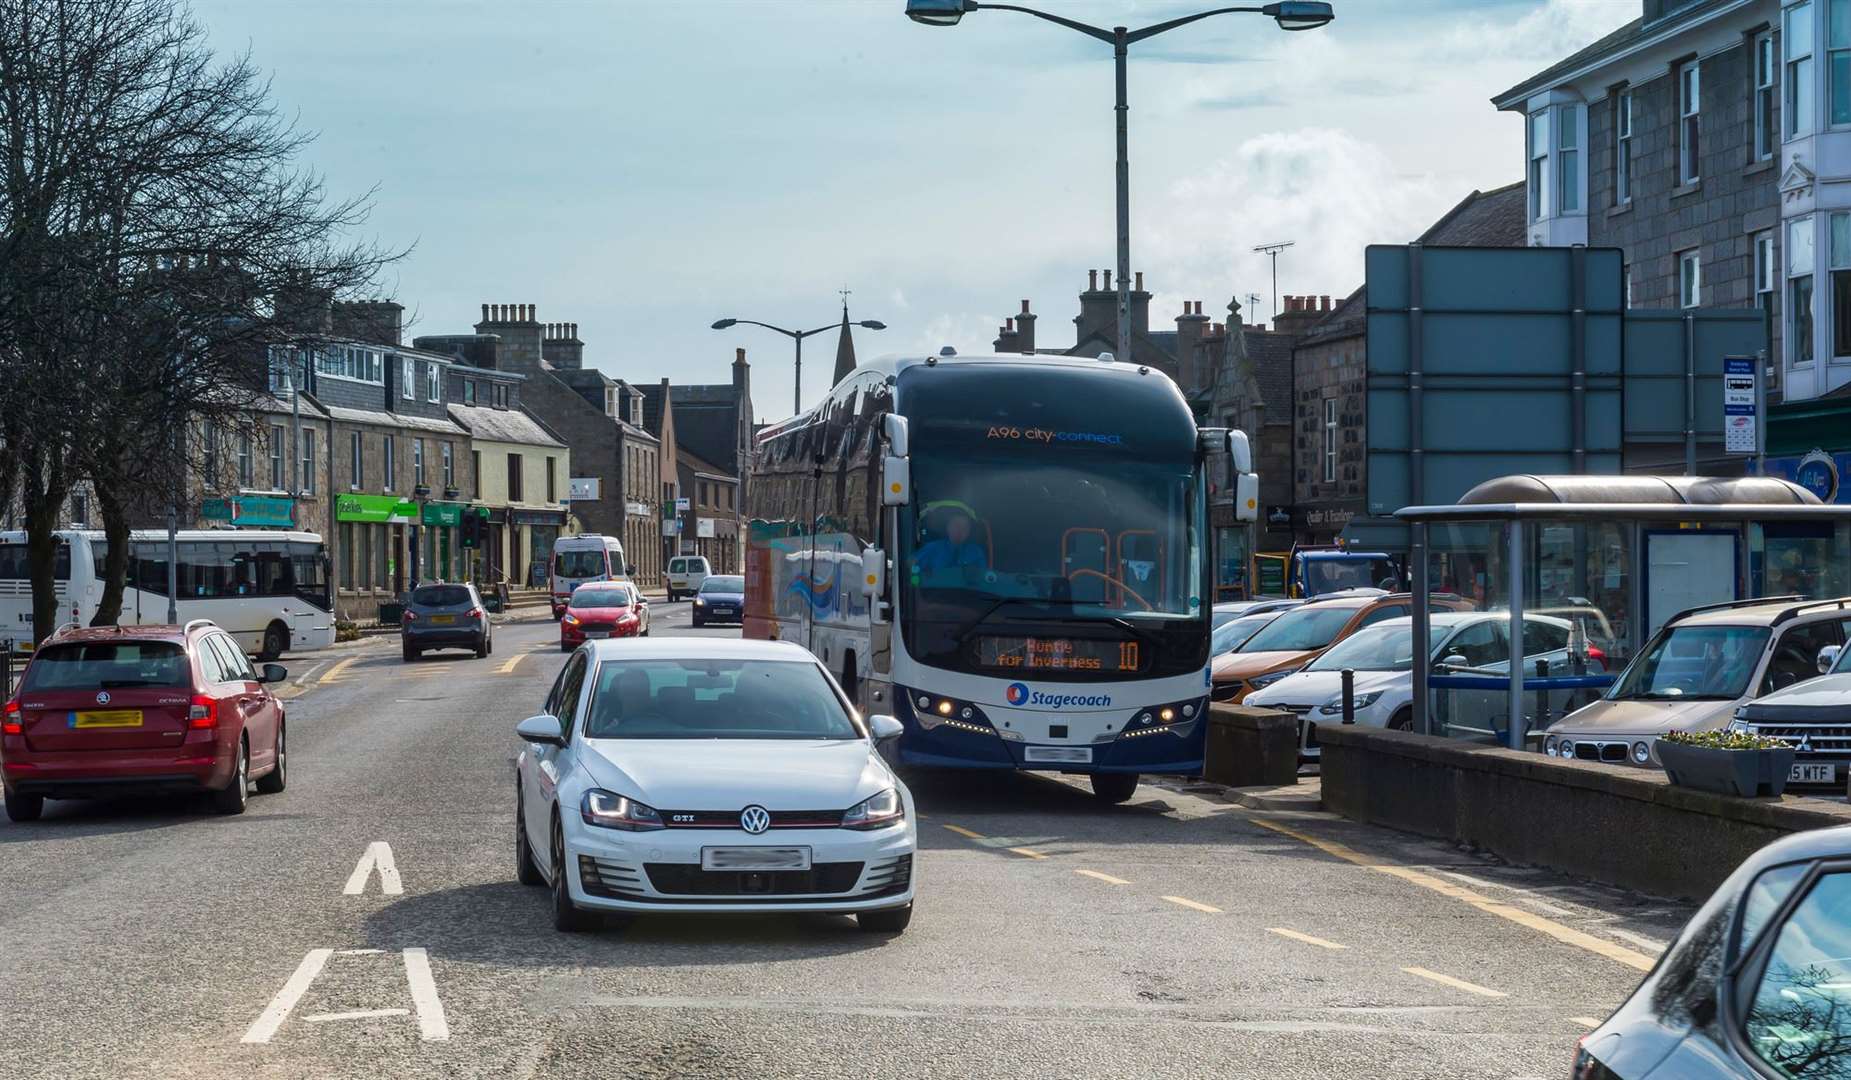 Feedback to Aberdeenshire Council will see revisions for access plans which may come into place in towns including Inverurie and Ellon.